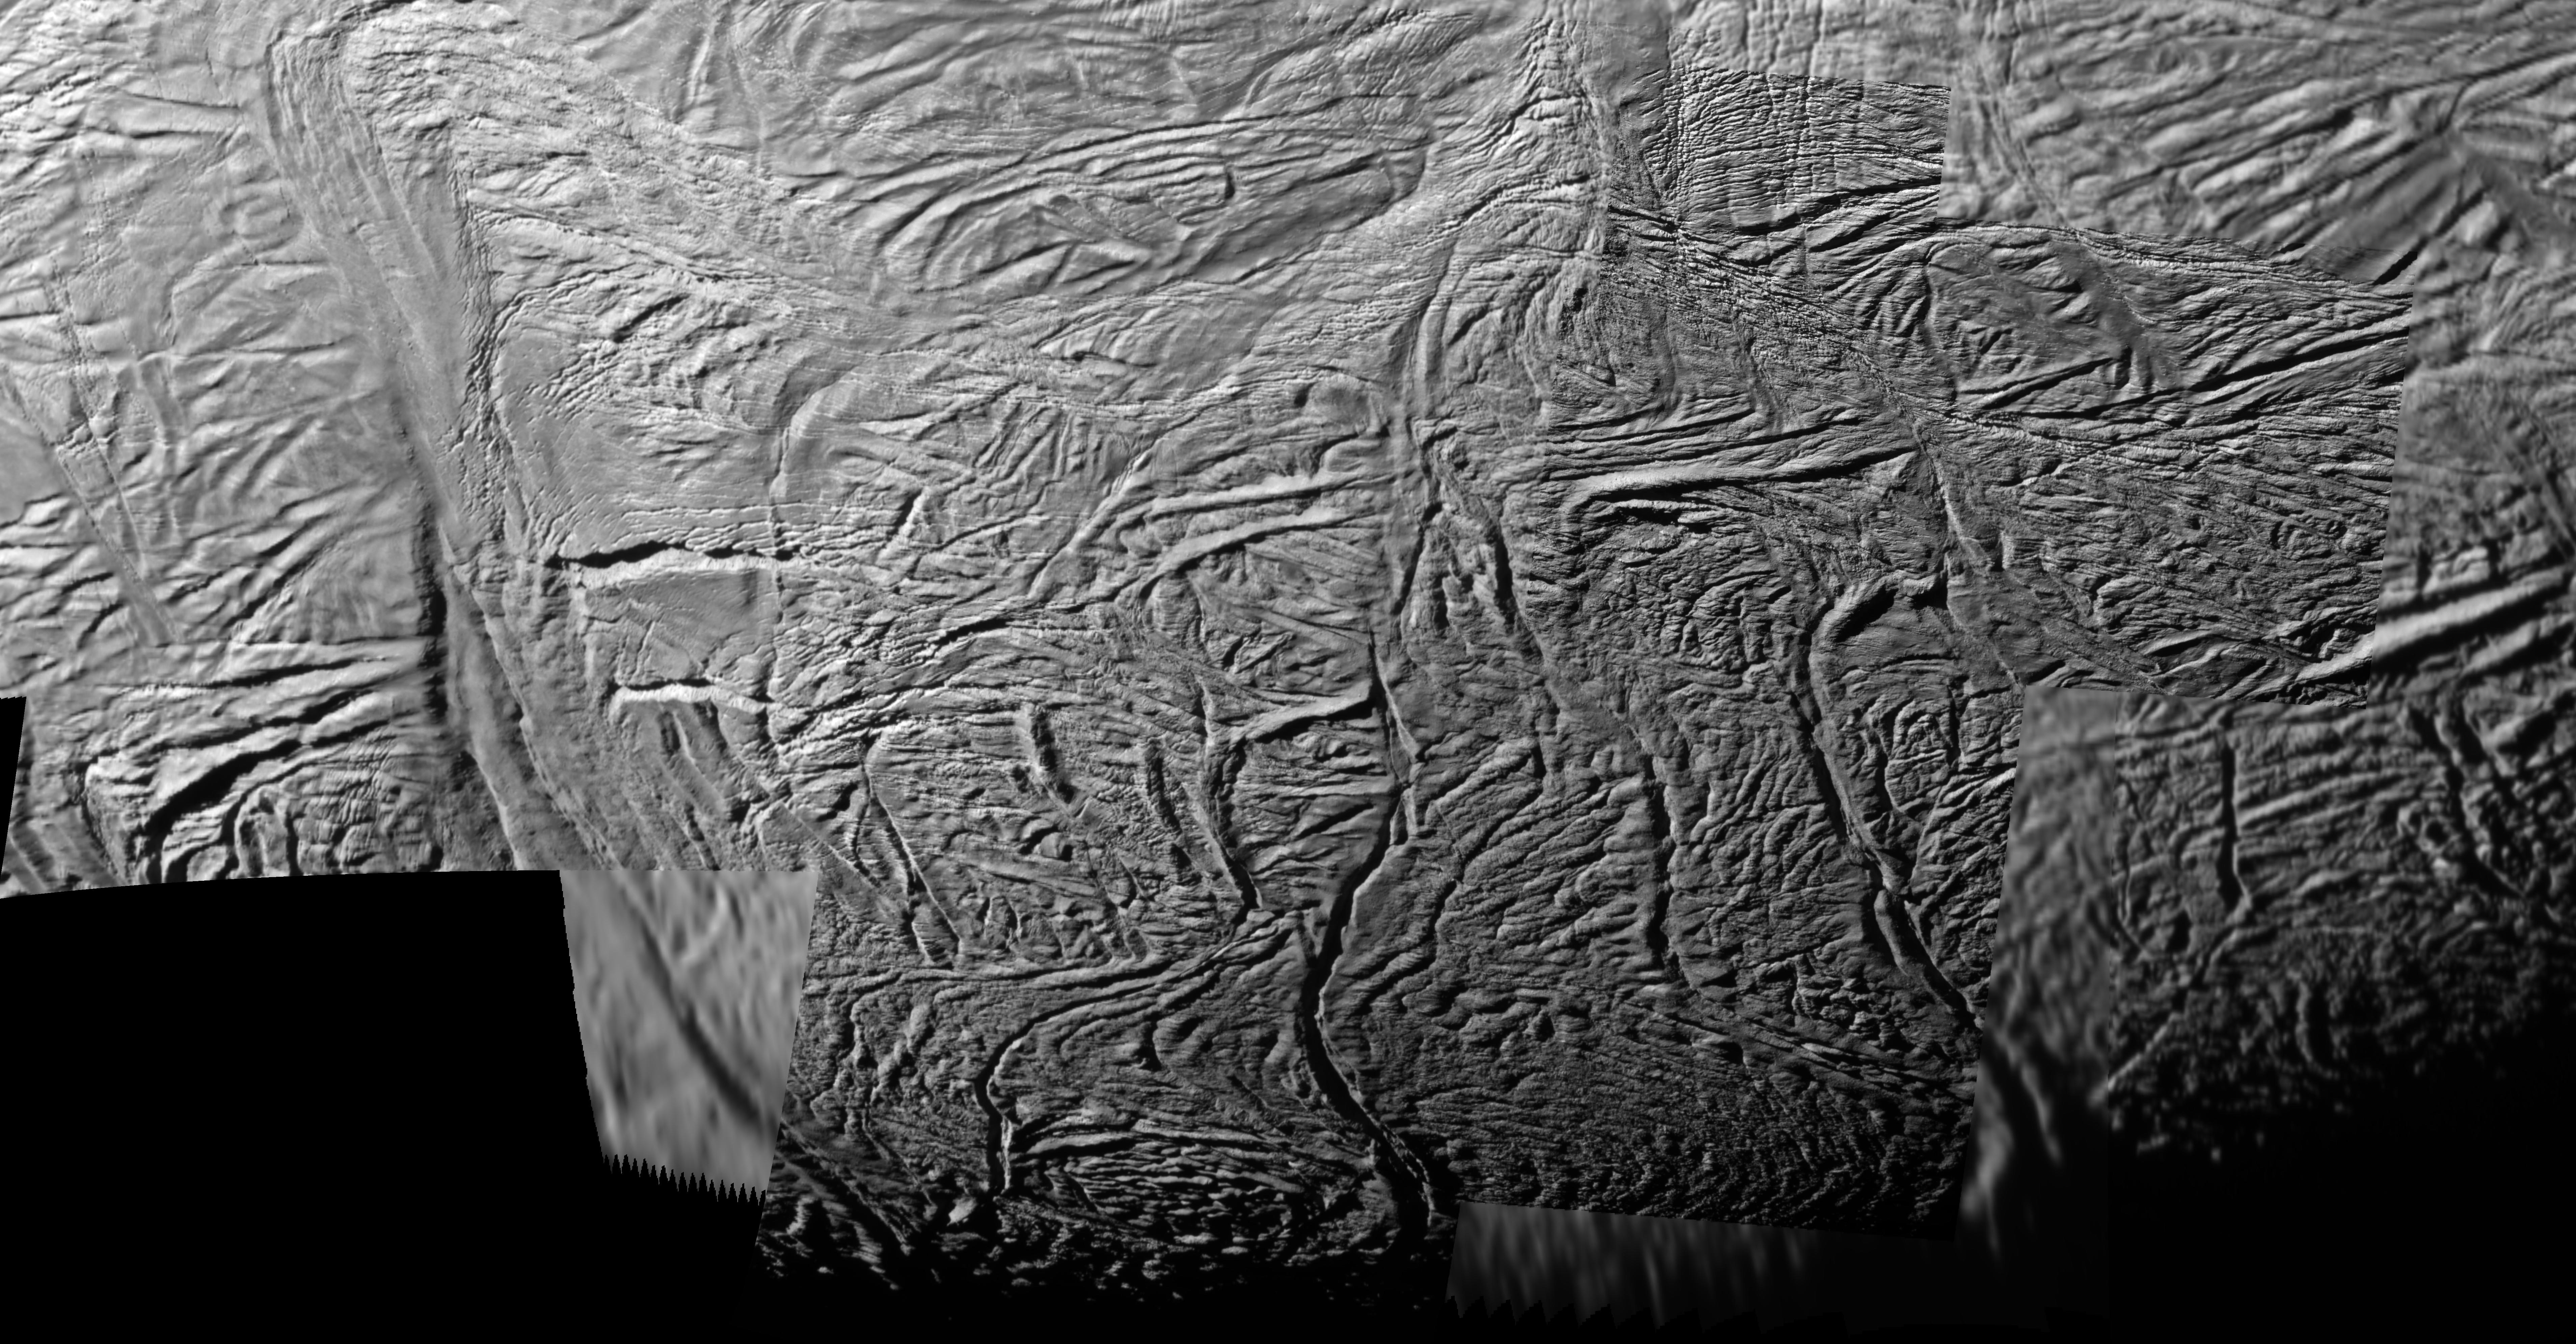 This mosaic shows extraordinary details of tectonic deformation in the fractured south polar region of Saturn’s moon Enceladus, where jets of water ice spray outward to form Saturn's E ring. 